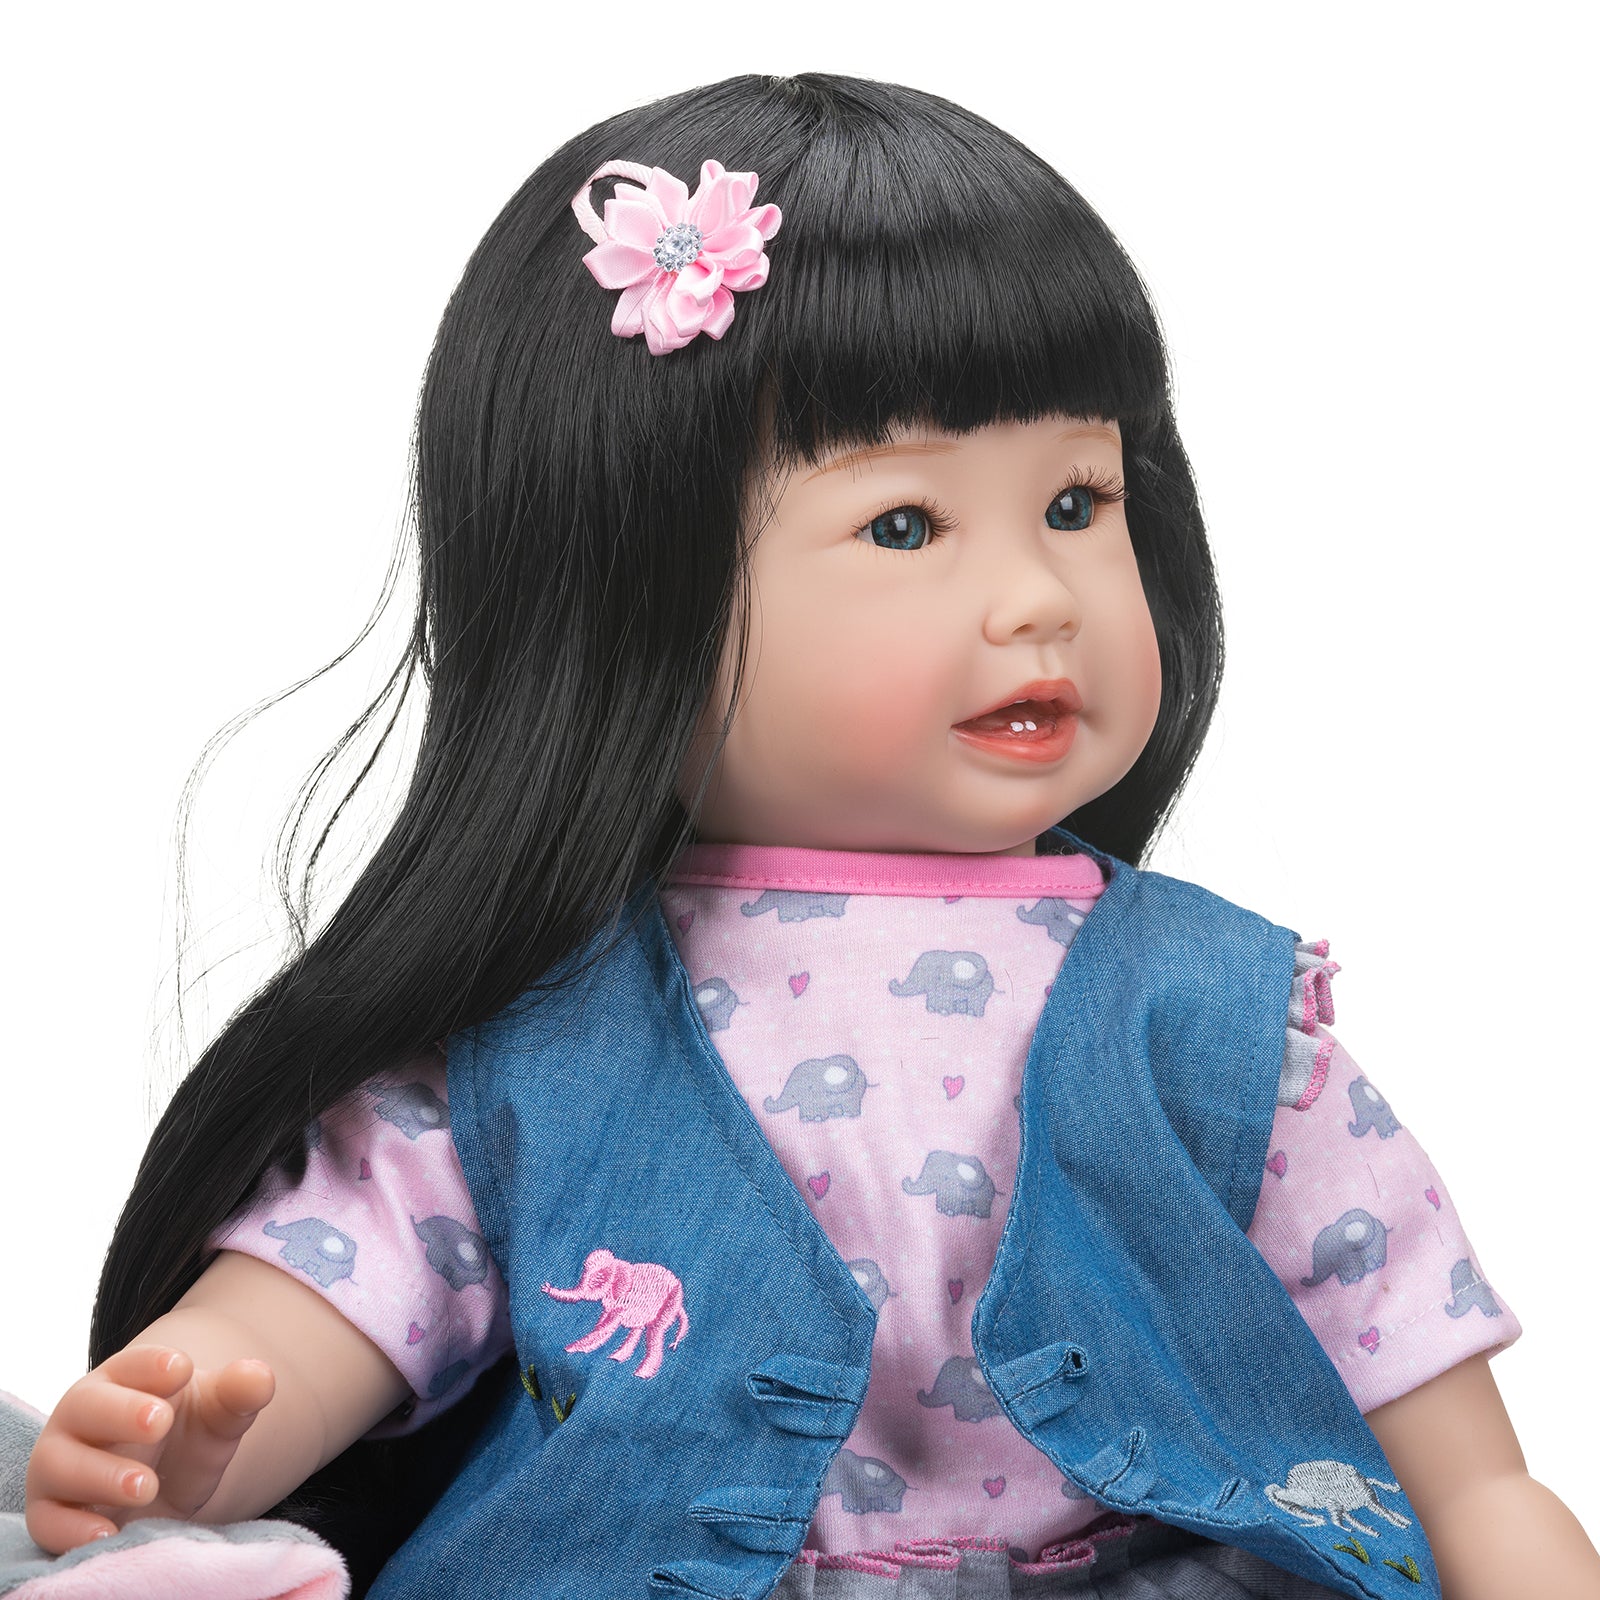 Lifelike Silicone Reborn Toddler Princess Girls Dolls with Long Hair 24 Inch 60CM Weighted Soft Cloth Body Realistic Baby Dolls That Ook Real Life Baby Dolls Toys Gift For 3+ Year Old Girls